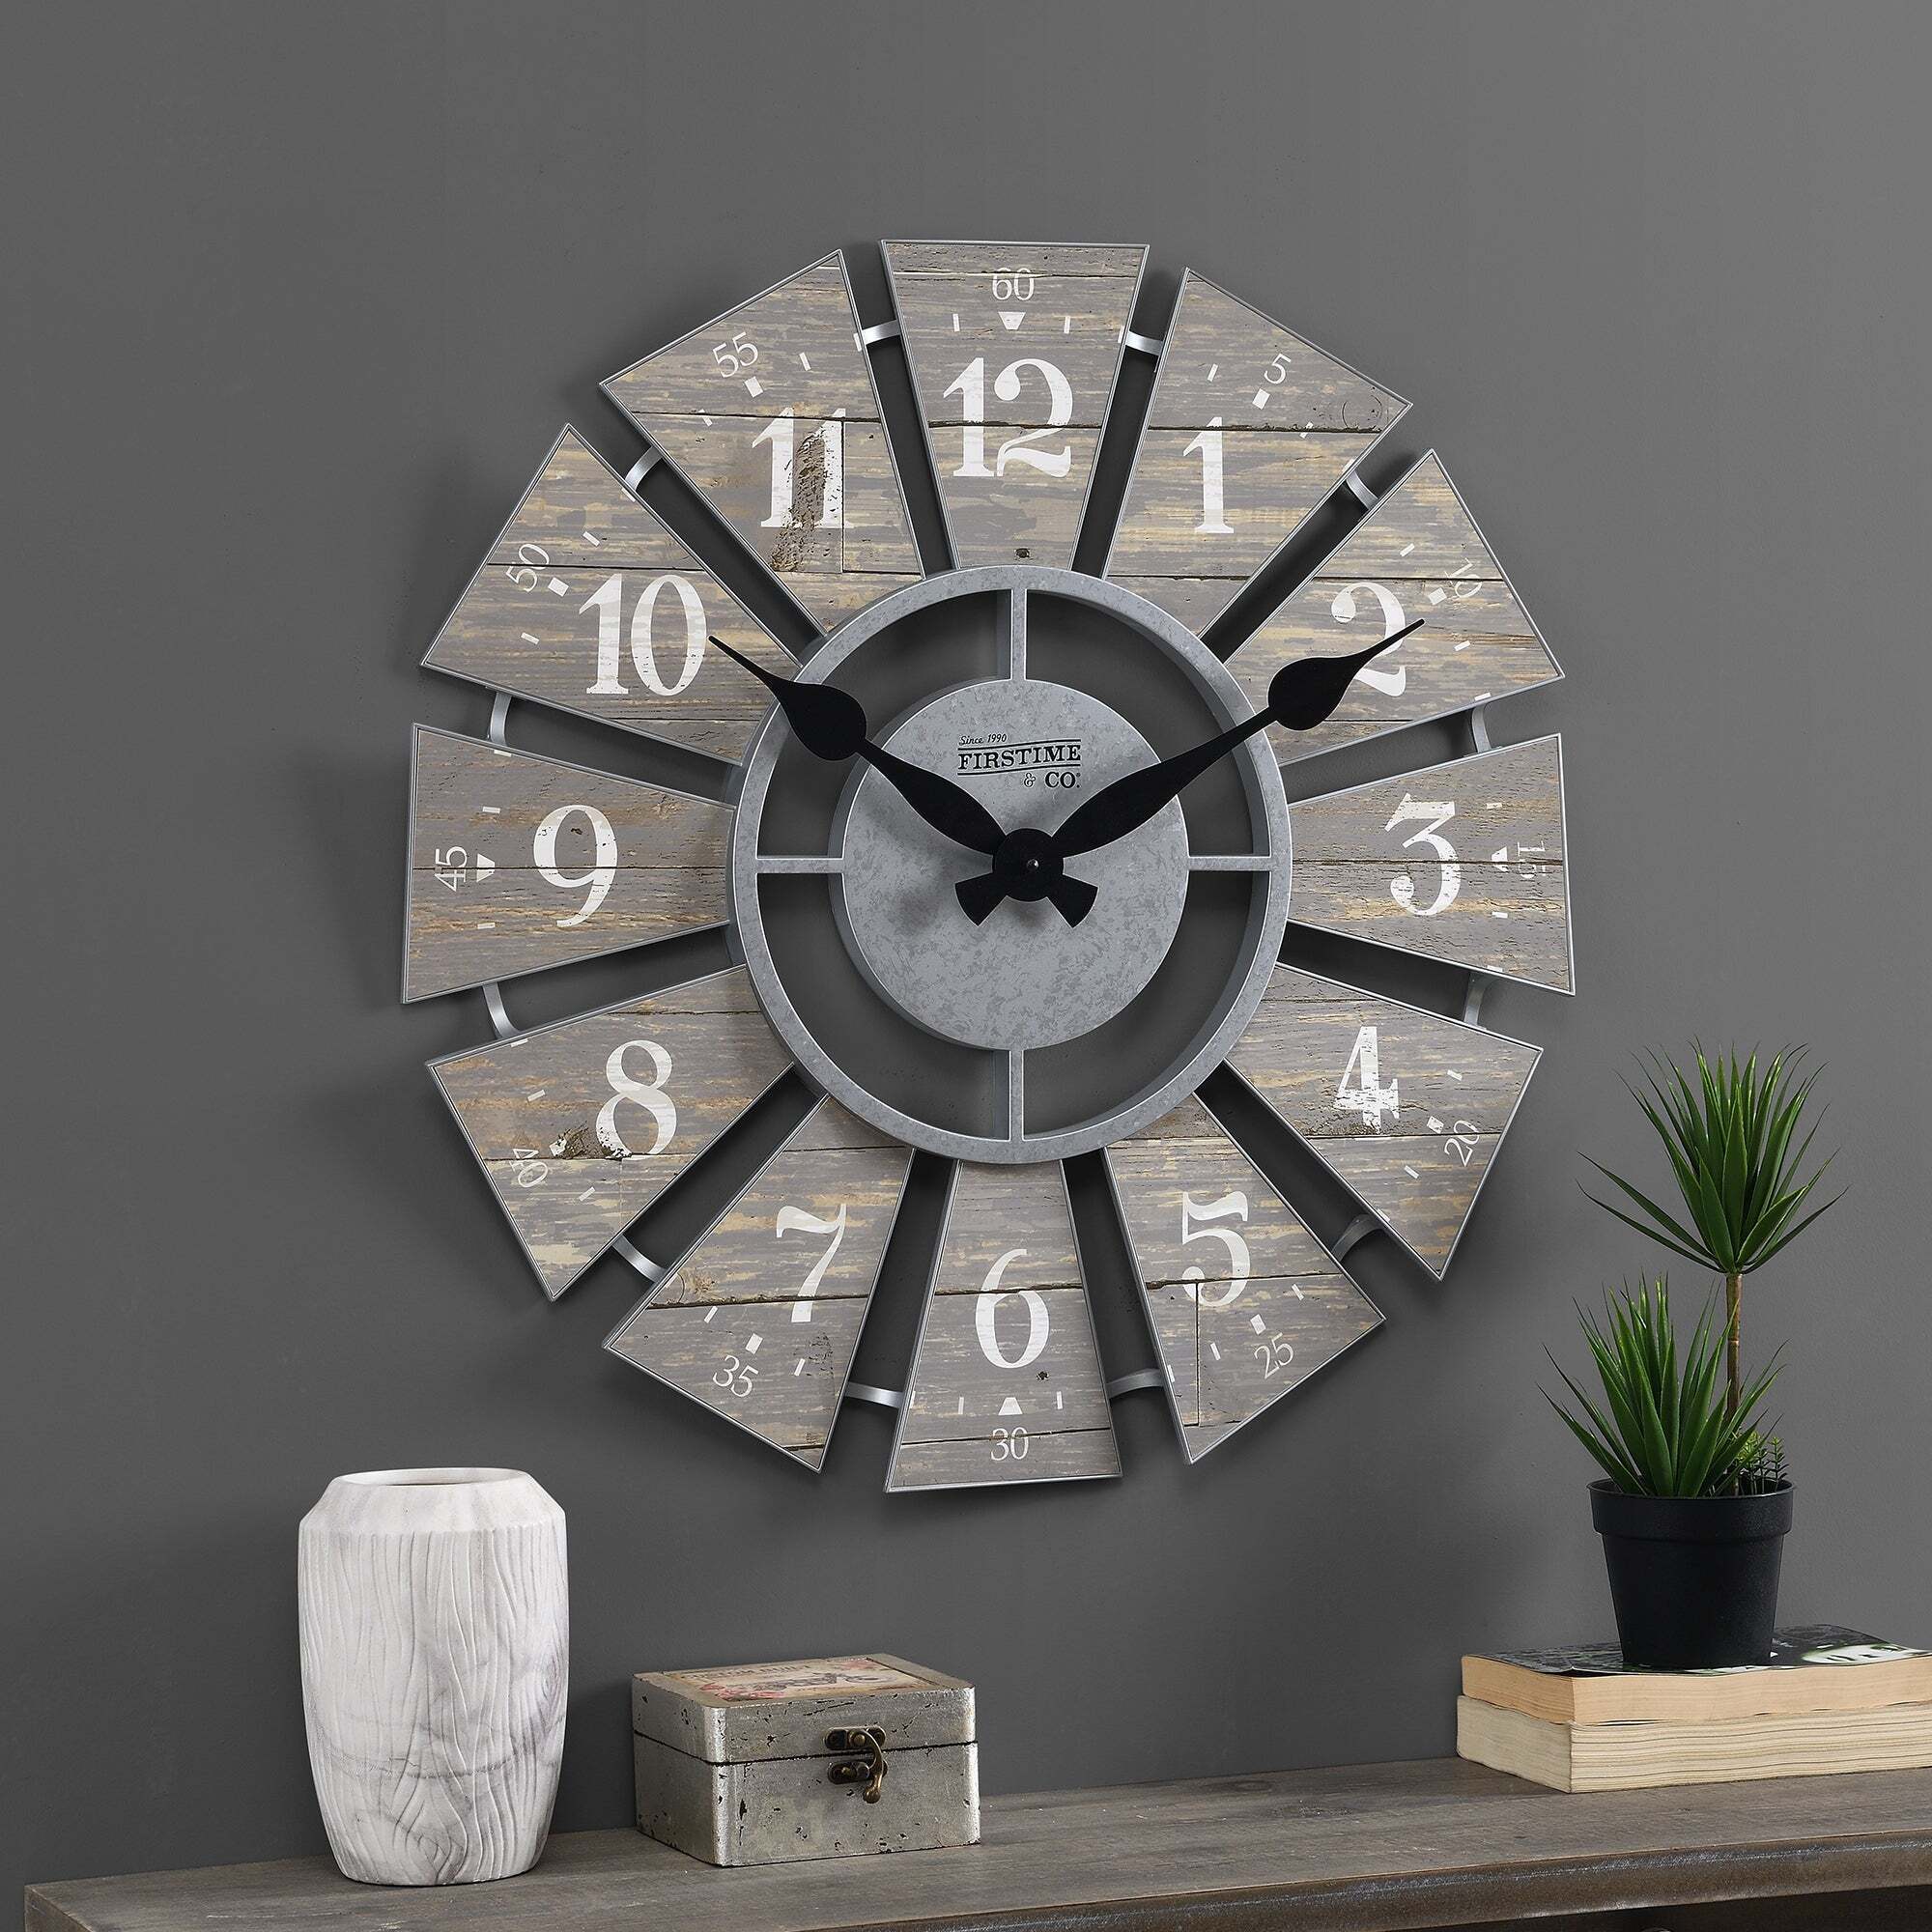 A farmhouse chic windmill inspired giant clock